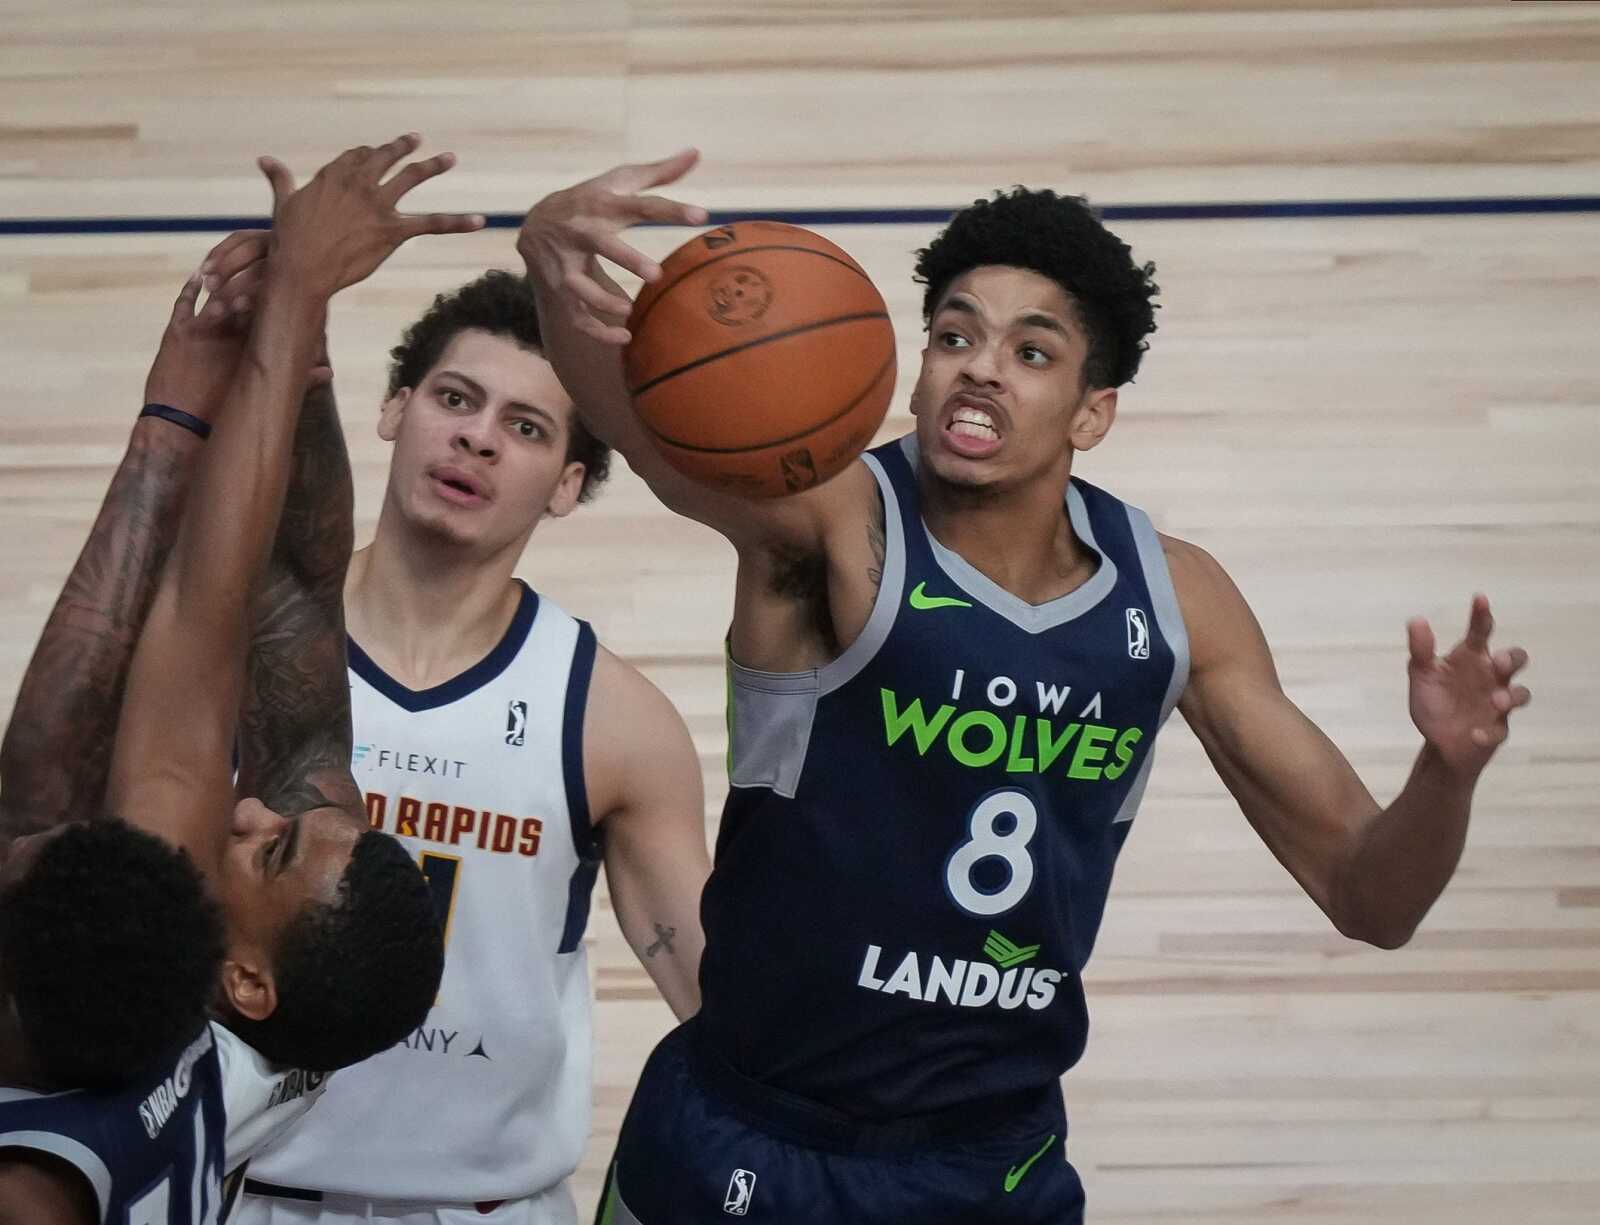 Iowa Wolves - Here they come 🐺 The Minnesota Timberwolves have